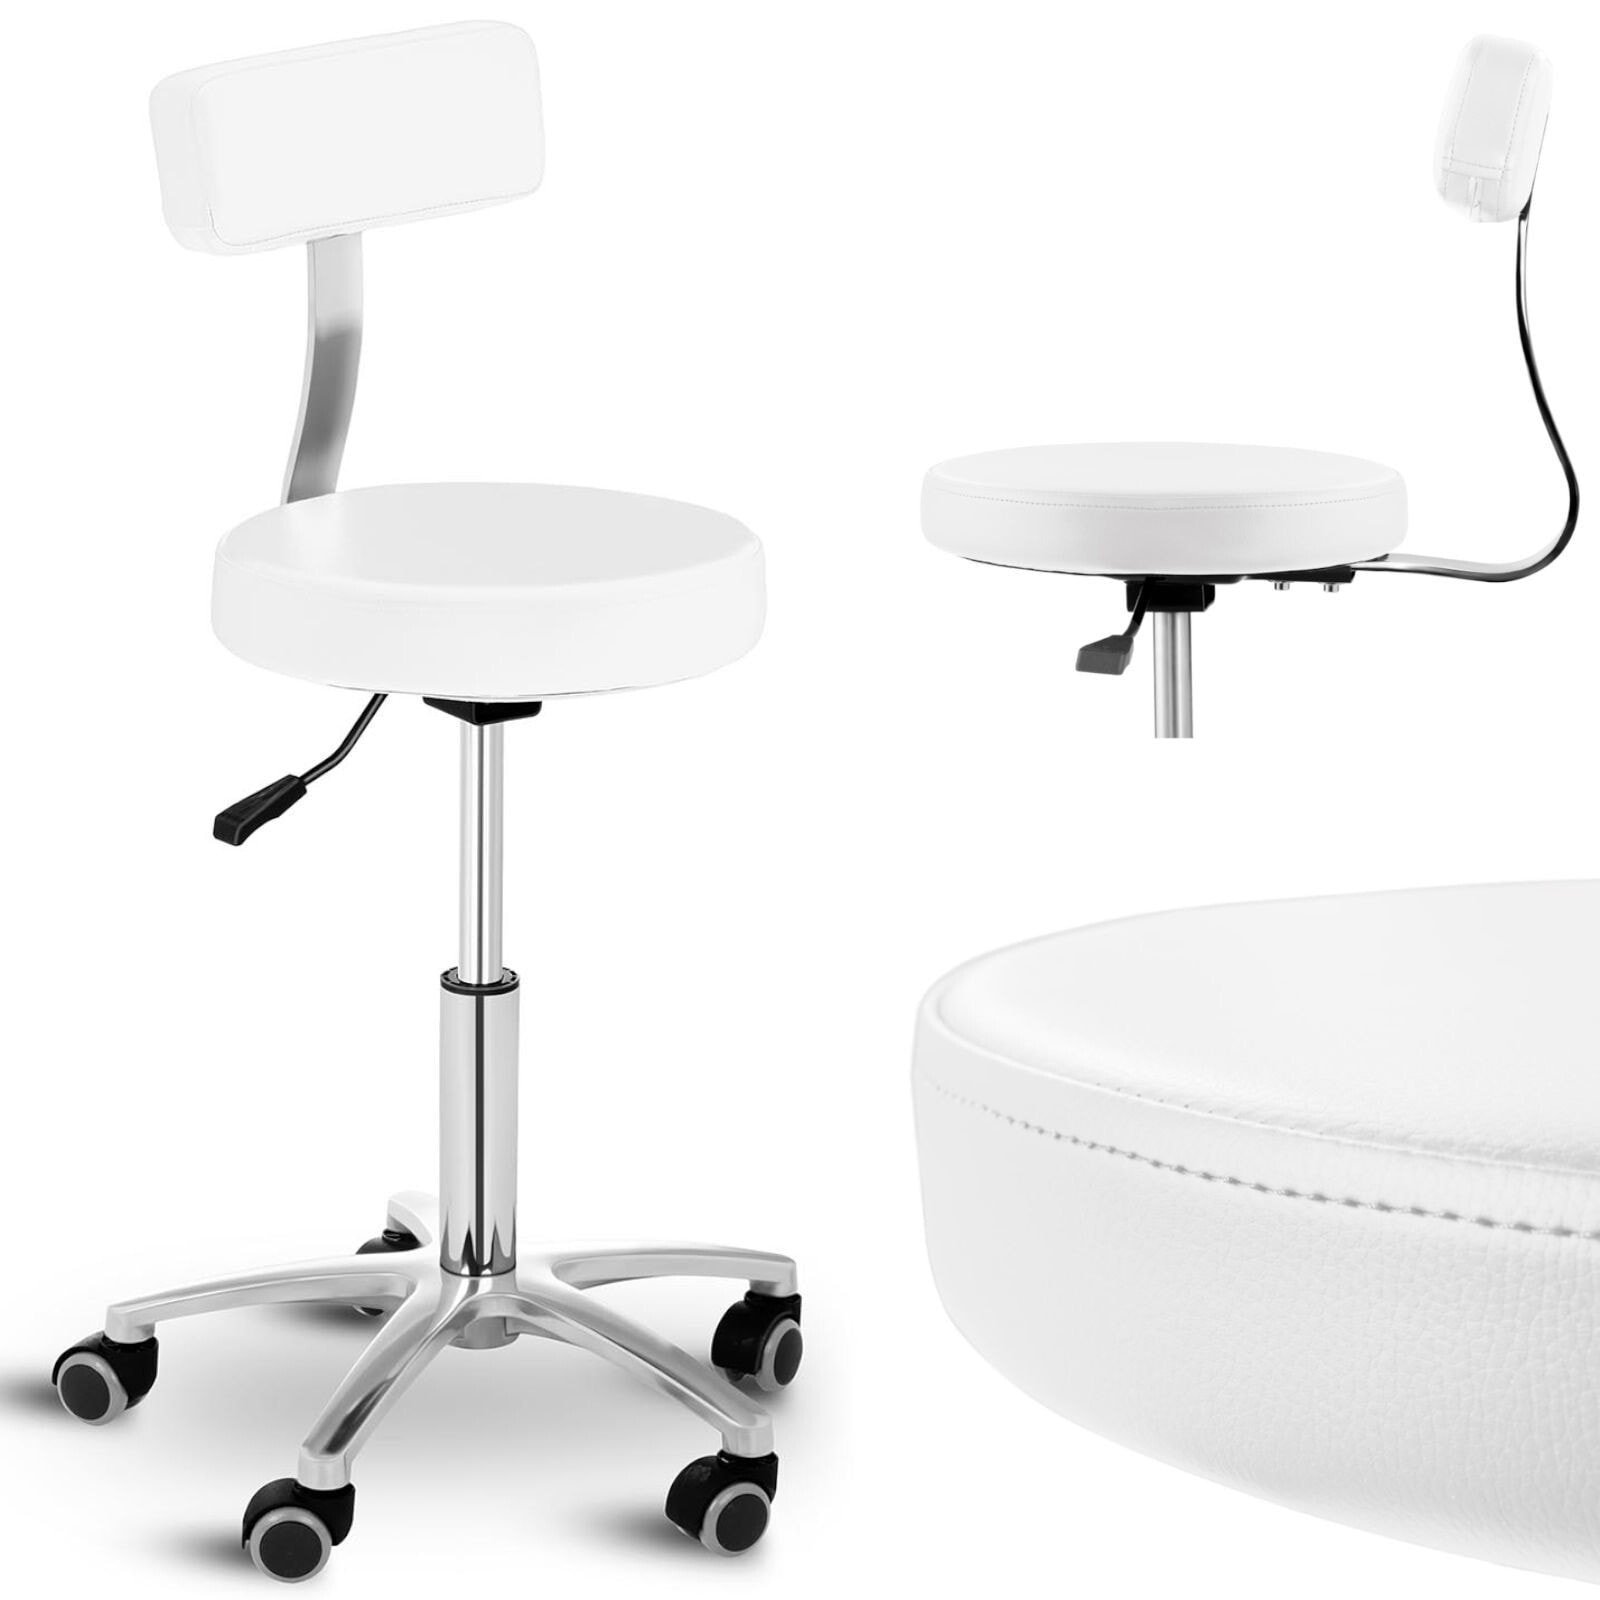 Cosmetic stool chair with backrest on wheels up to 150 kg TERNI white